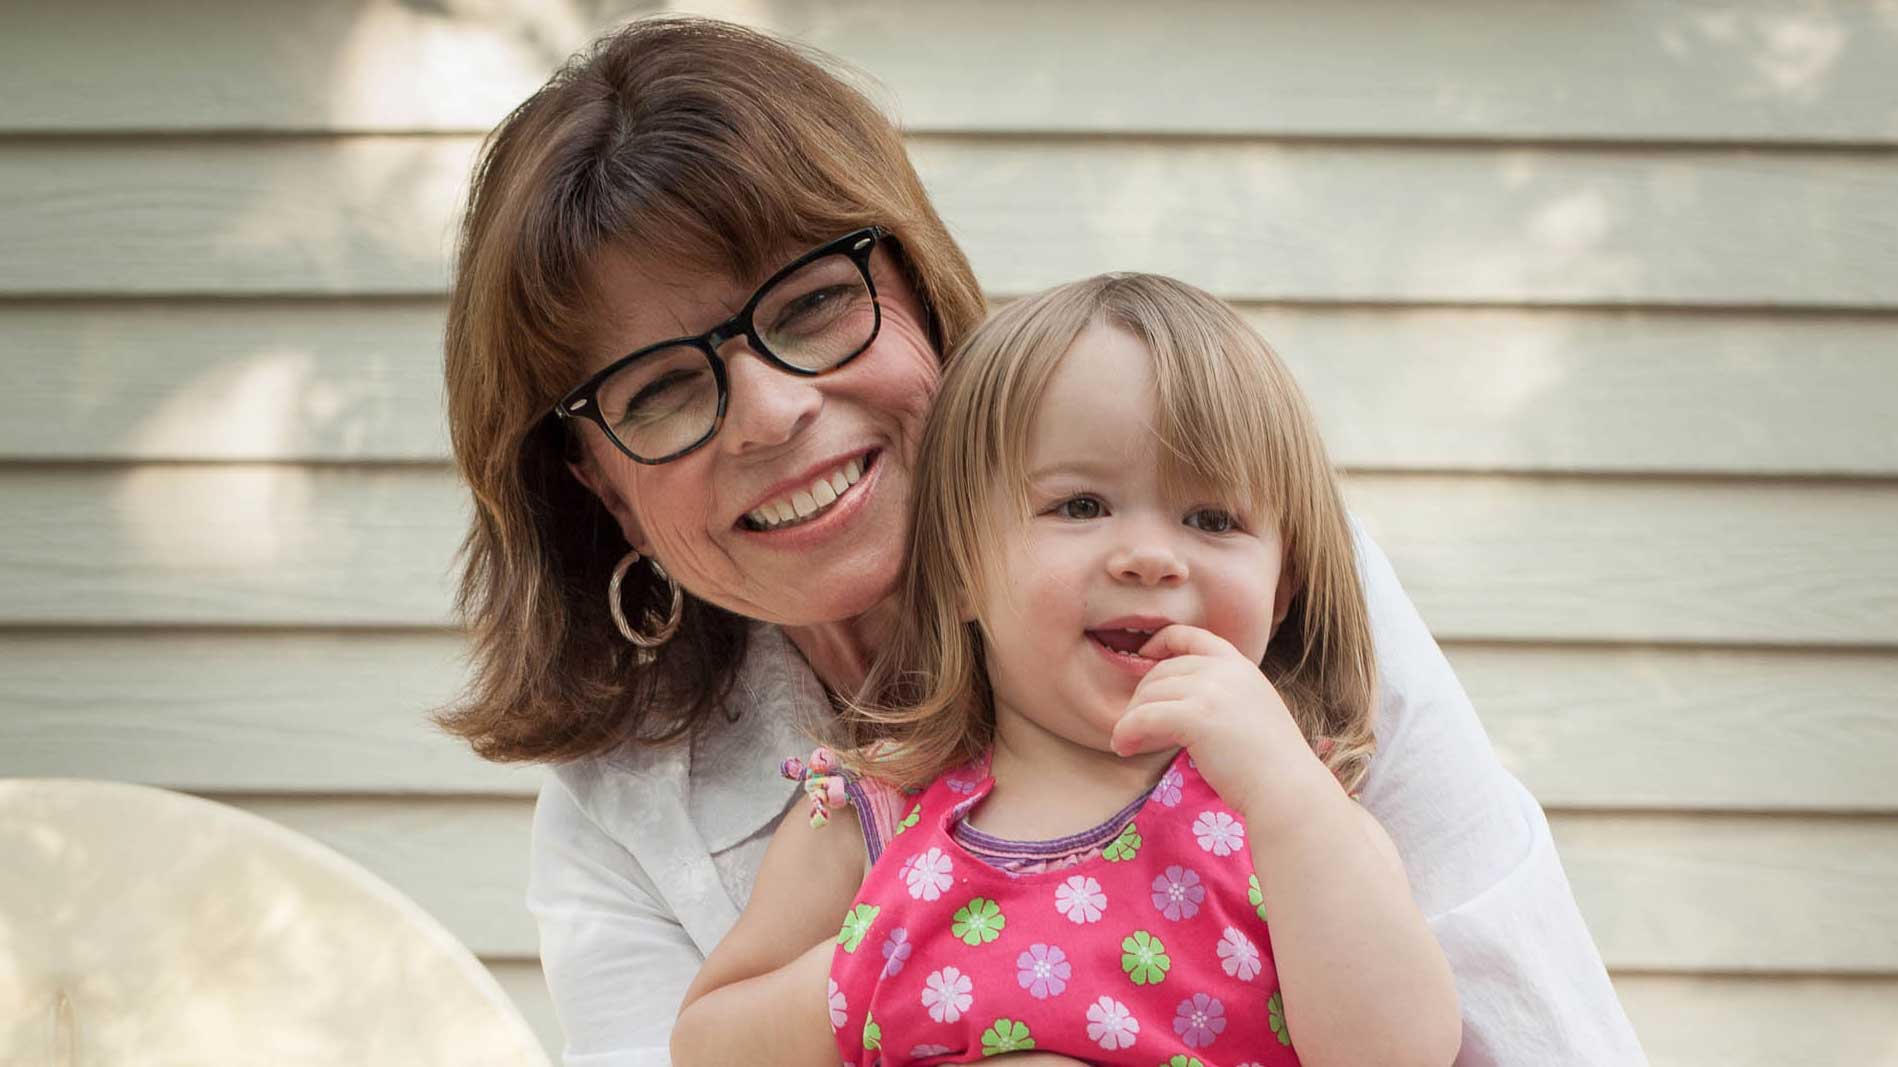 A woman with glasses smiles as she holds a toddler, who is also smiling.